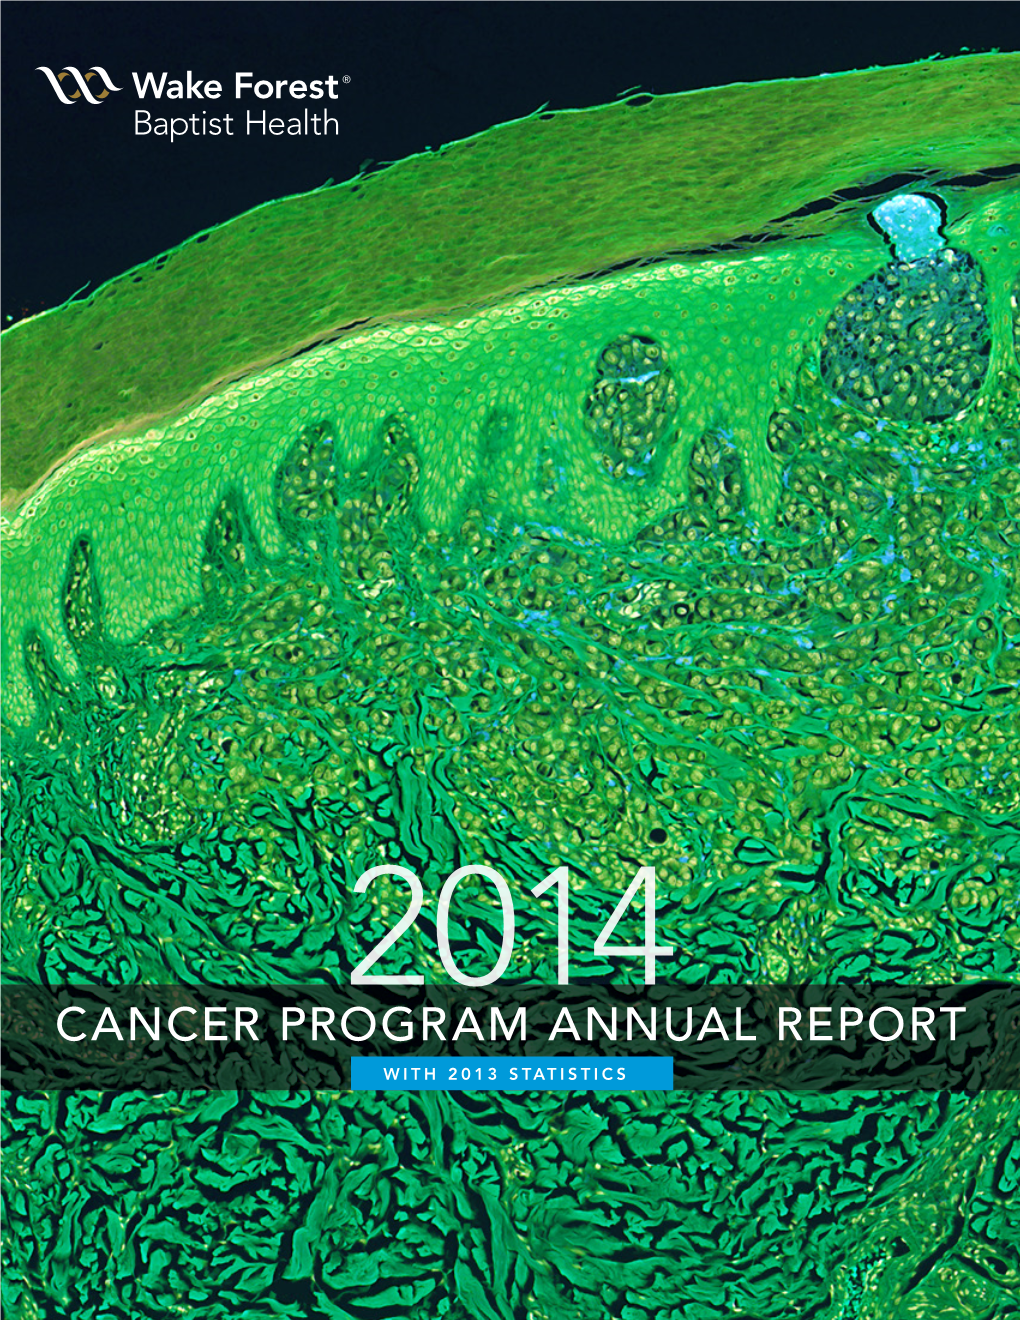 Wake Forest Comprehensive Cancer Center Annual Report 2014